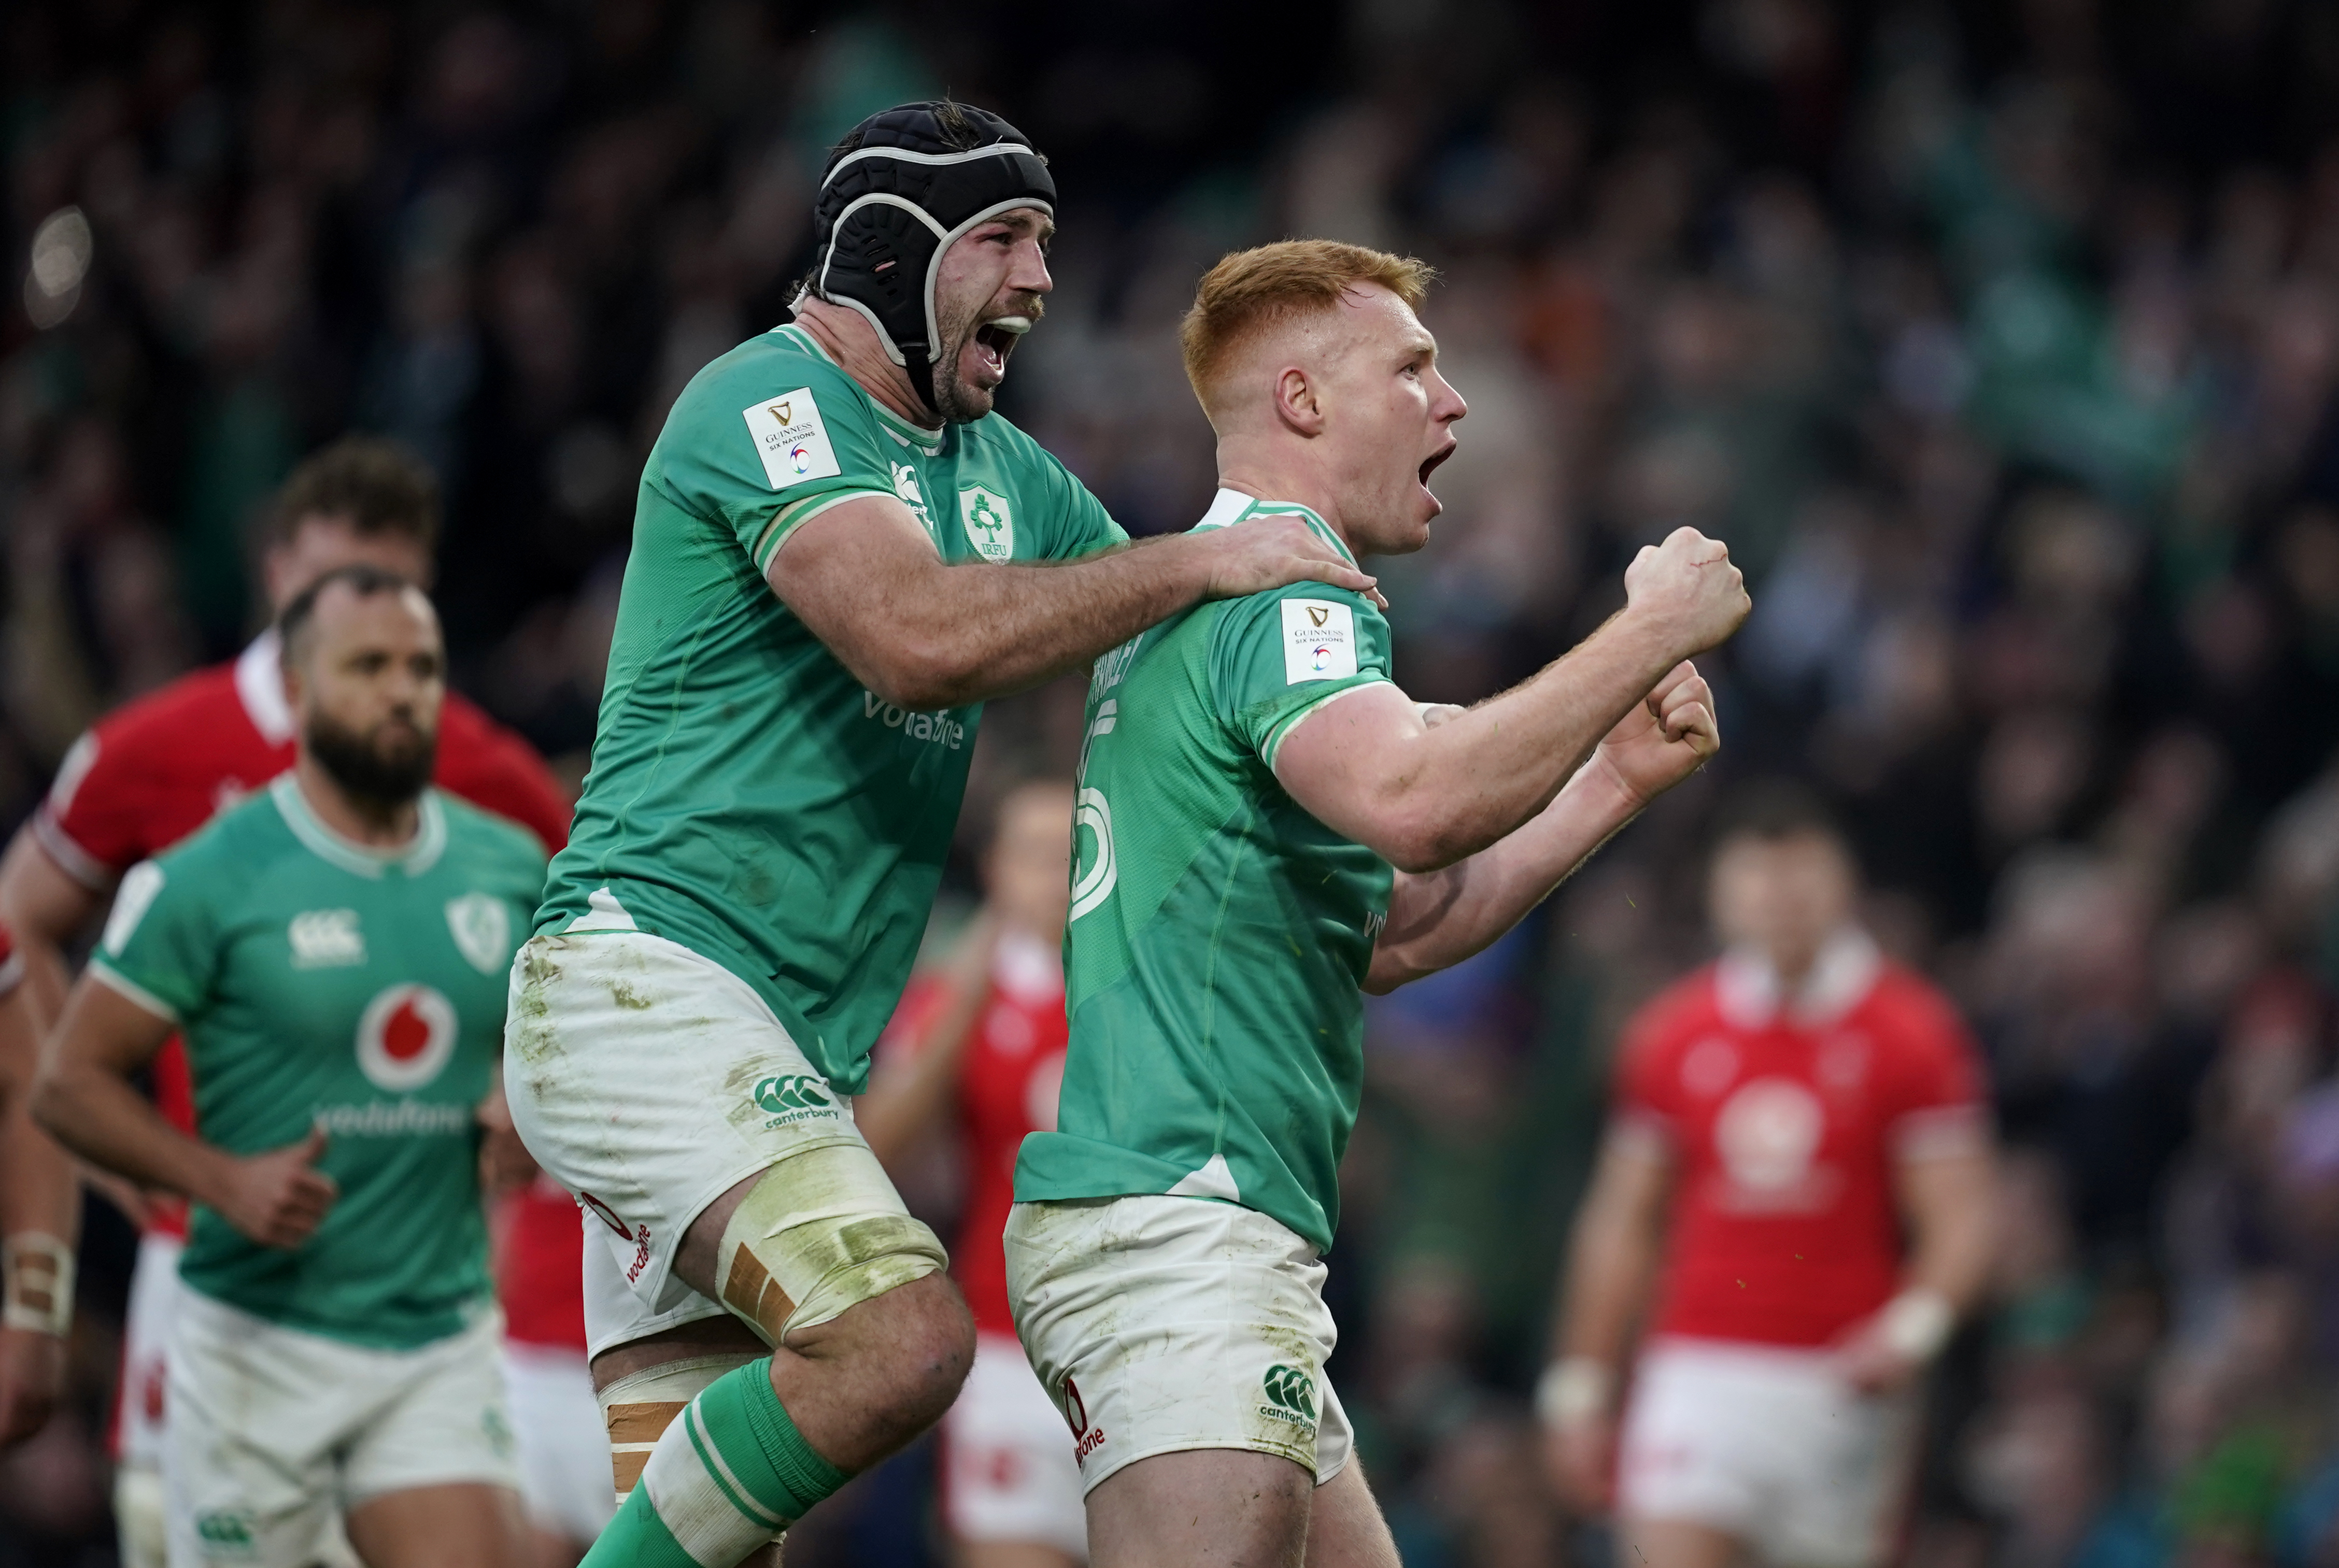 Ireland overcame Wales without being at their best